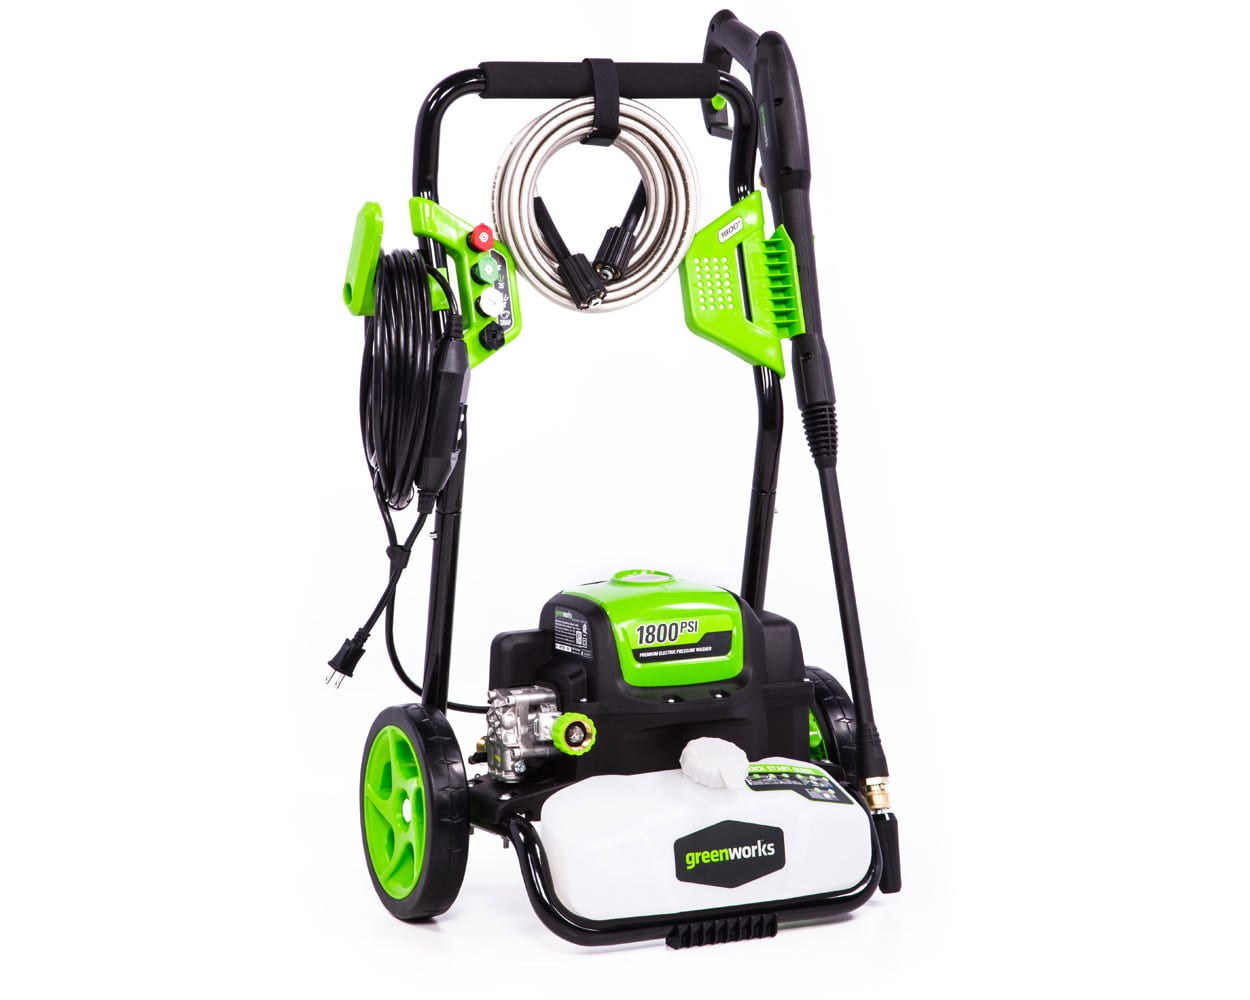 GreenWorks GPW1803 13A 1800-PSI Electric Pressure Washer for sale online 